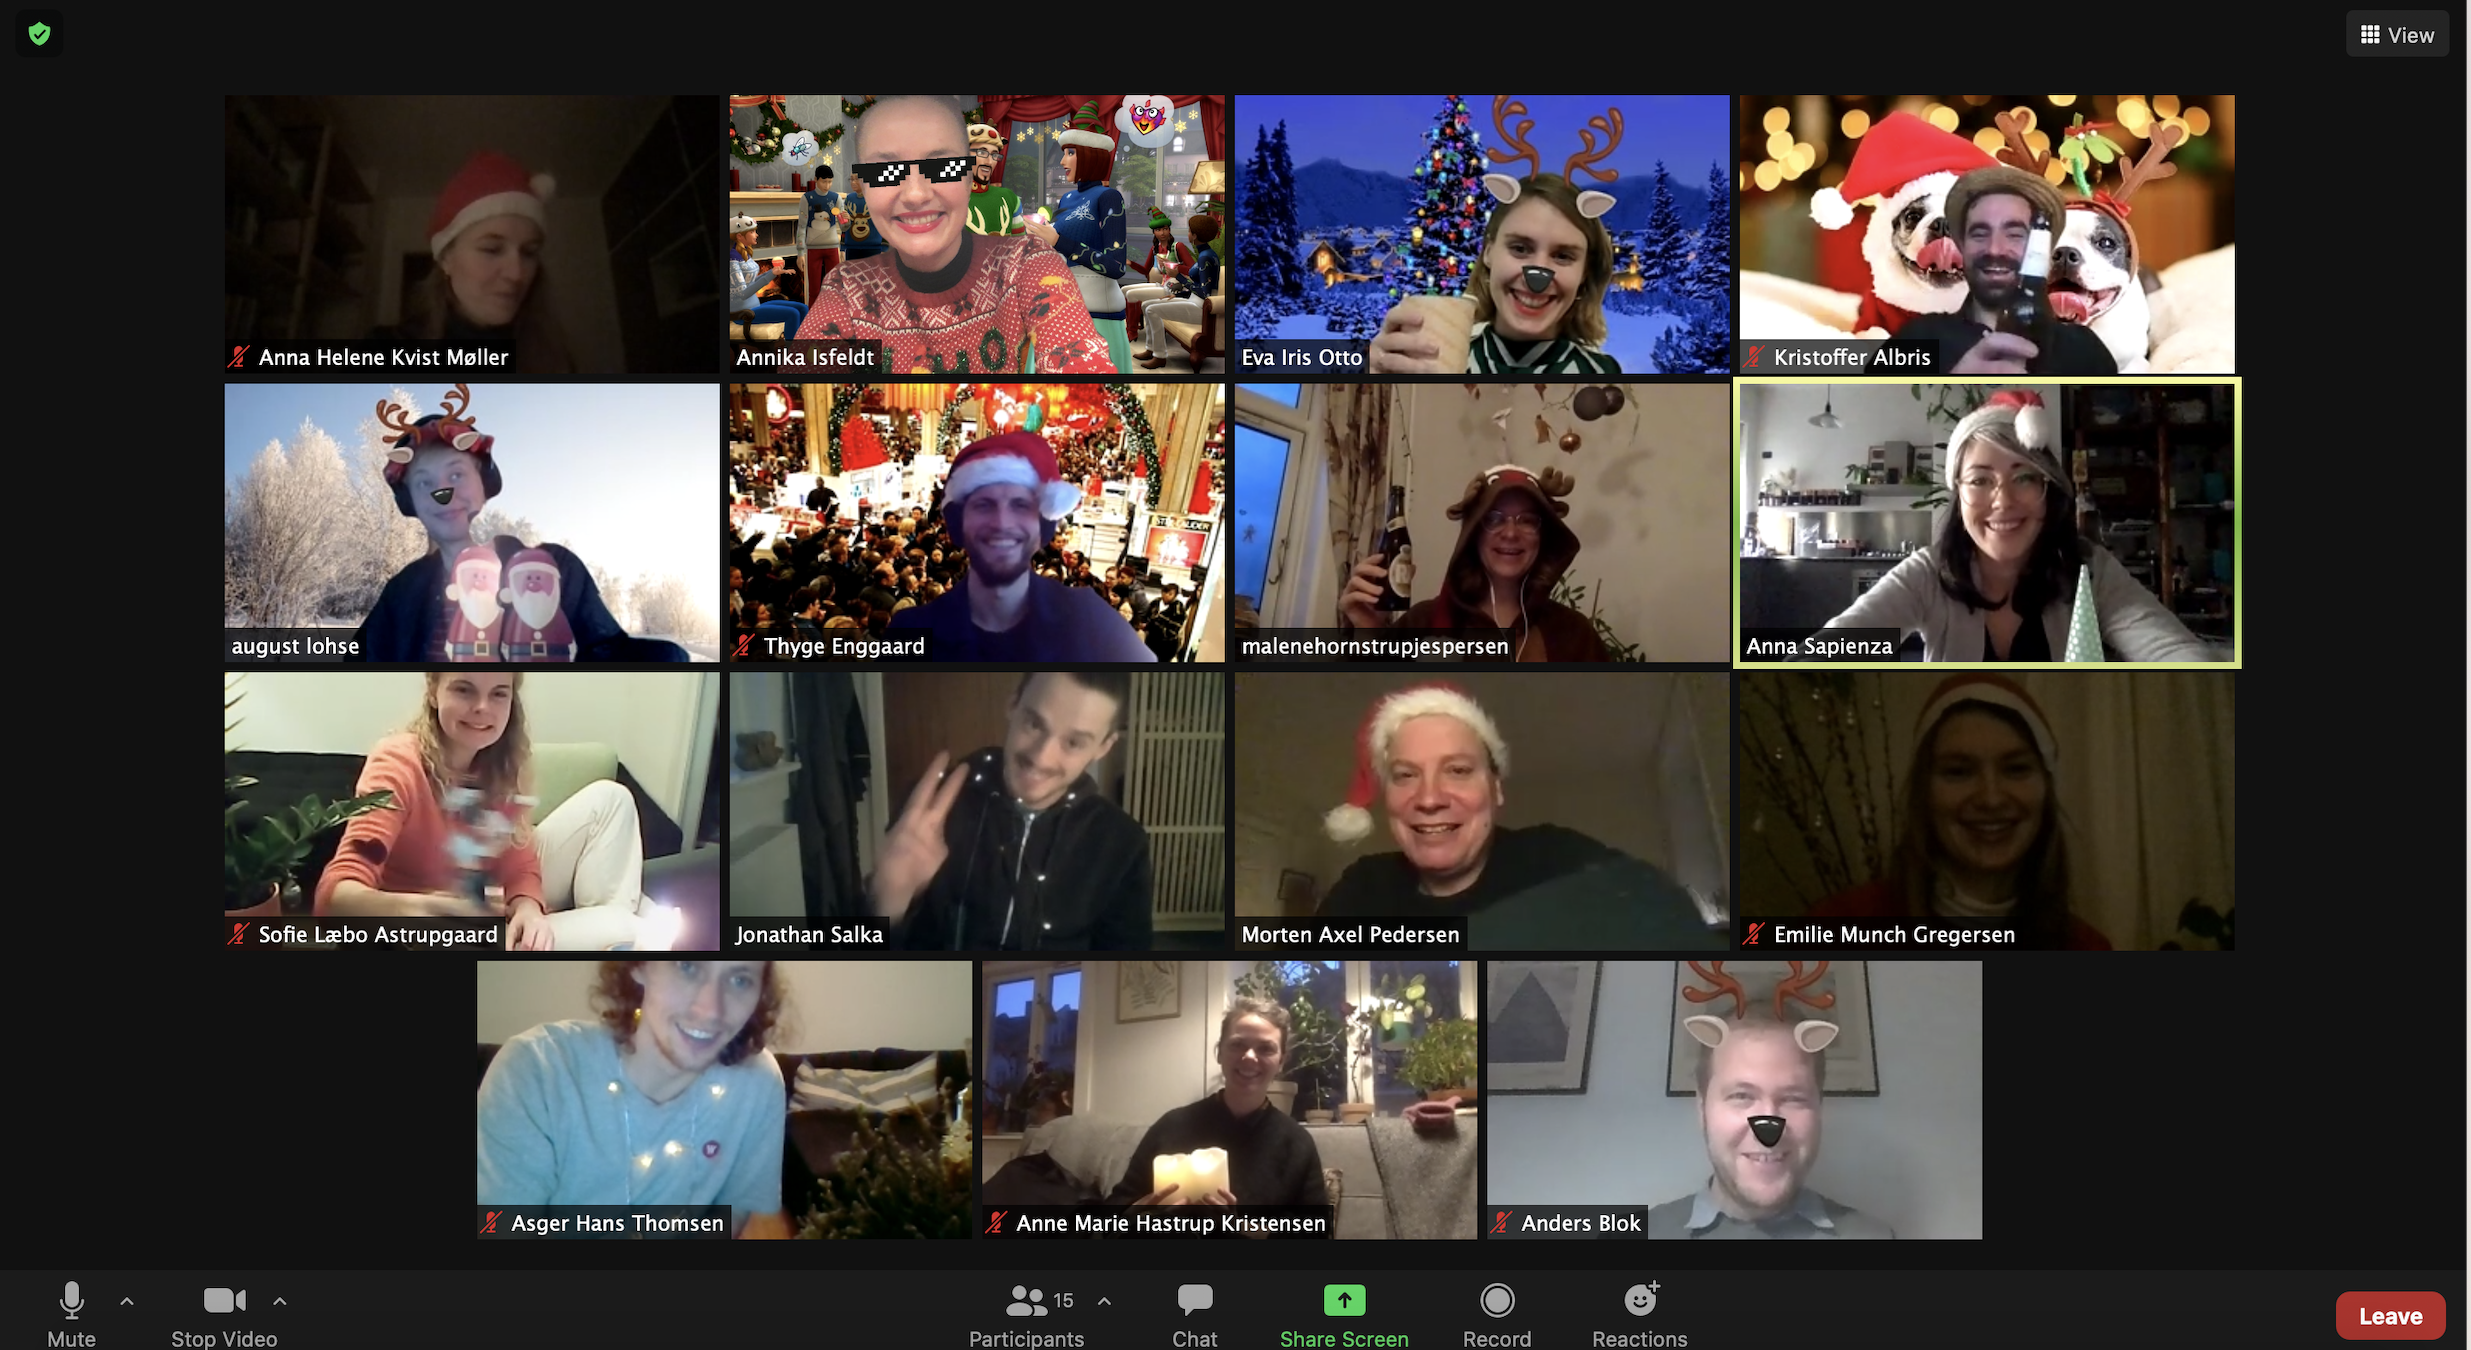 Happy holidays from the DISTRACT team